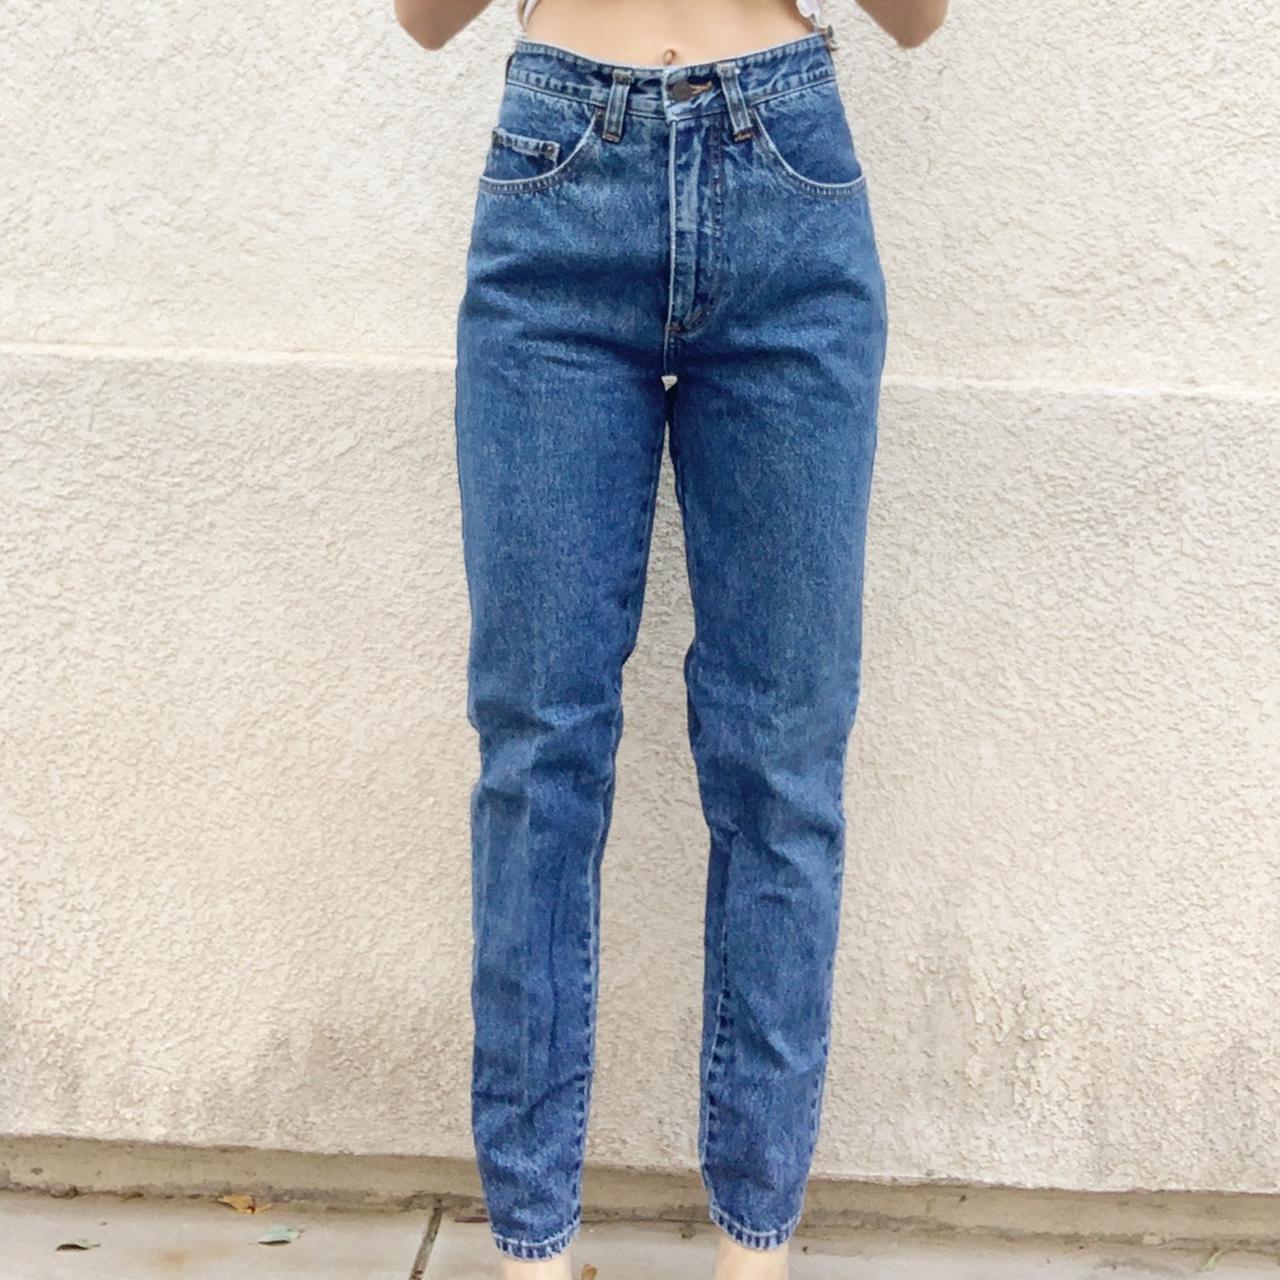 90s Pepe High Rise Jeans Size 7/8 Vintage Mom Jeans Ladies High